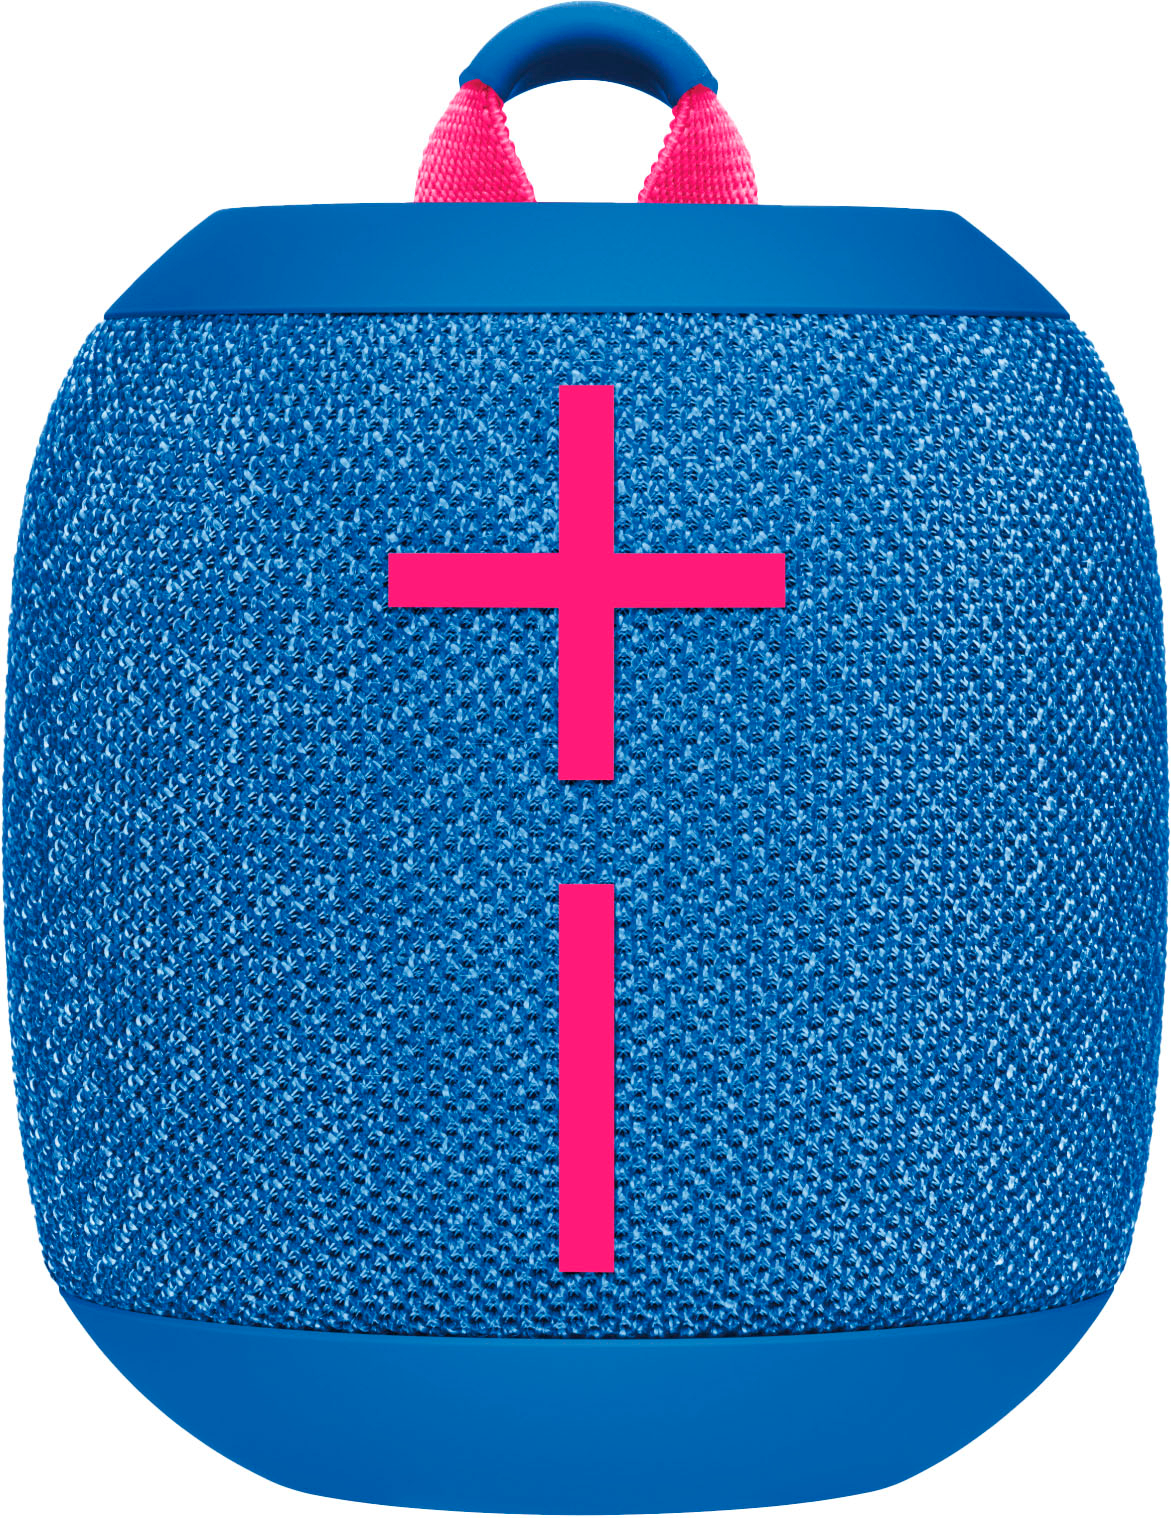 New Wonderboom 3 Bluetooth speaker is a big disappointment – I expected  better